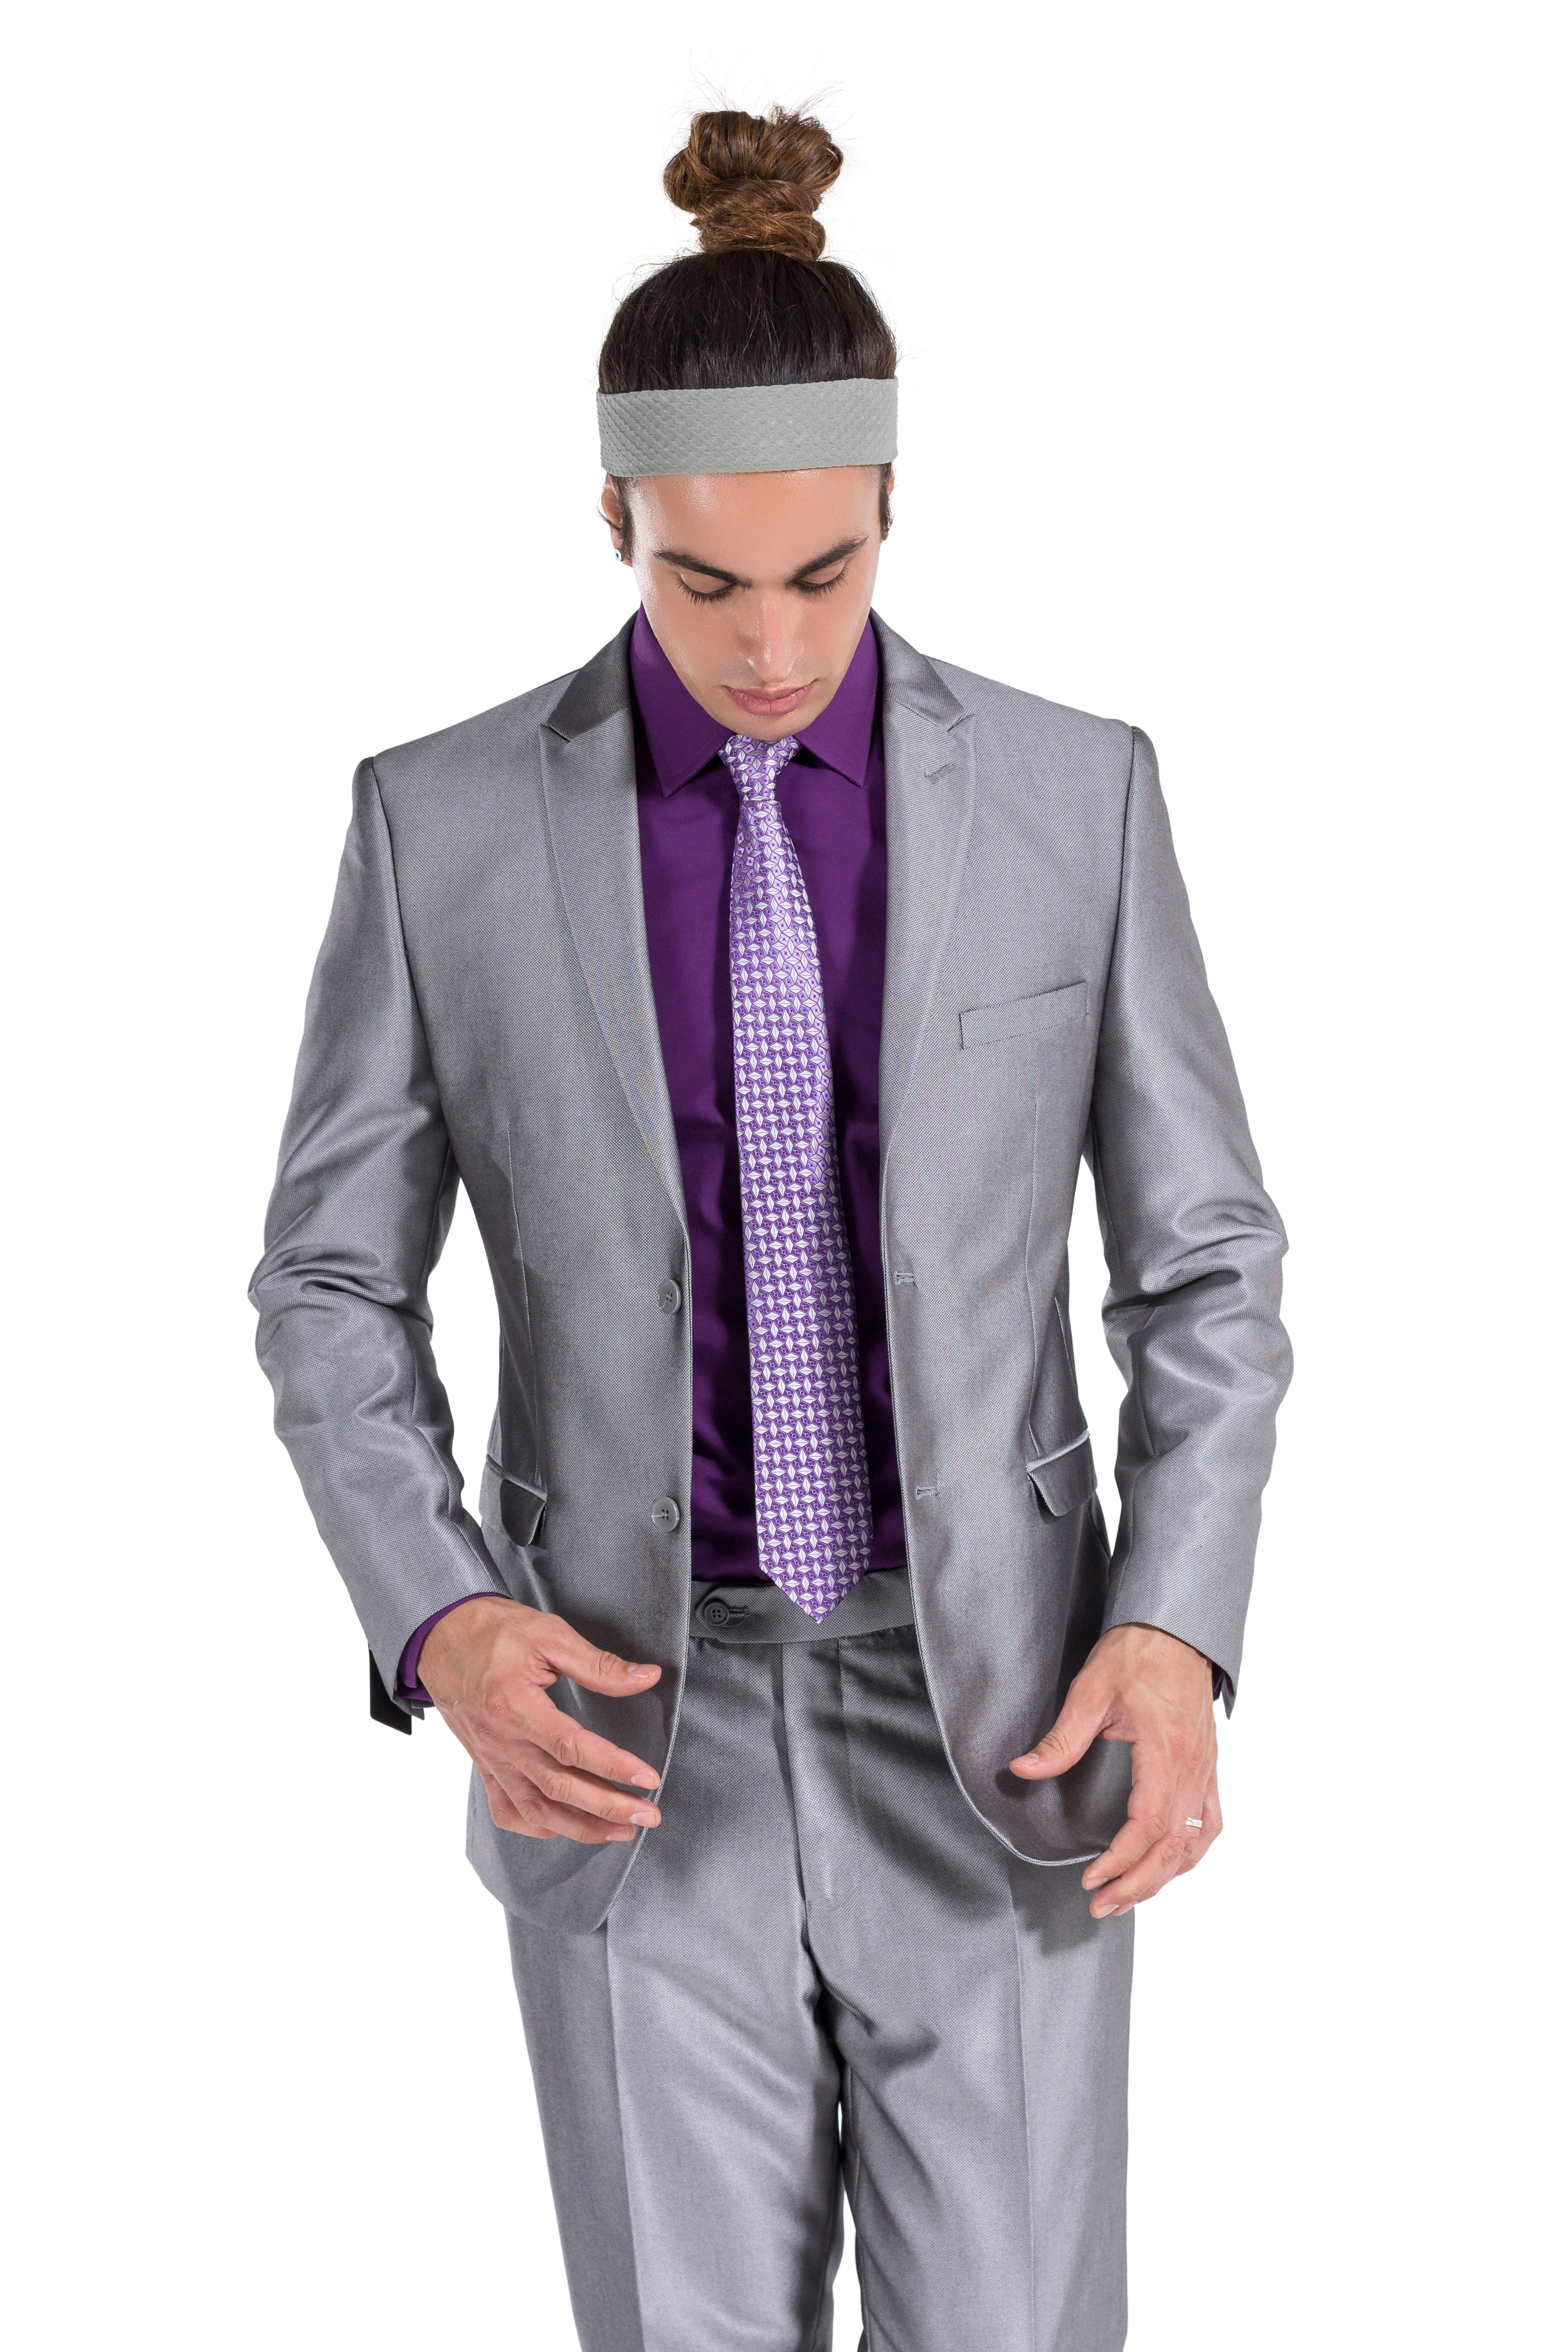 Tuatara Gray Checks-Plaid Premium Terry Rayon Double-Breasted-Suit for Men.